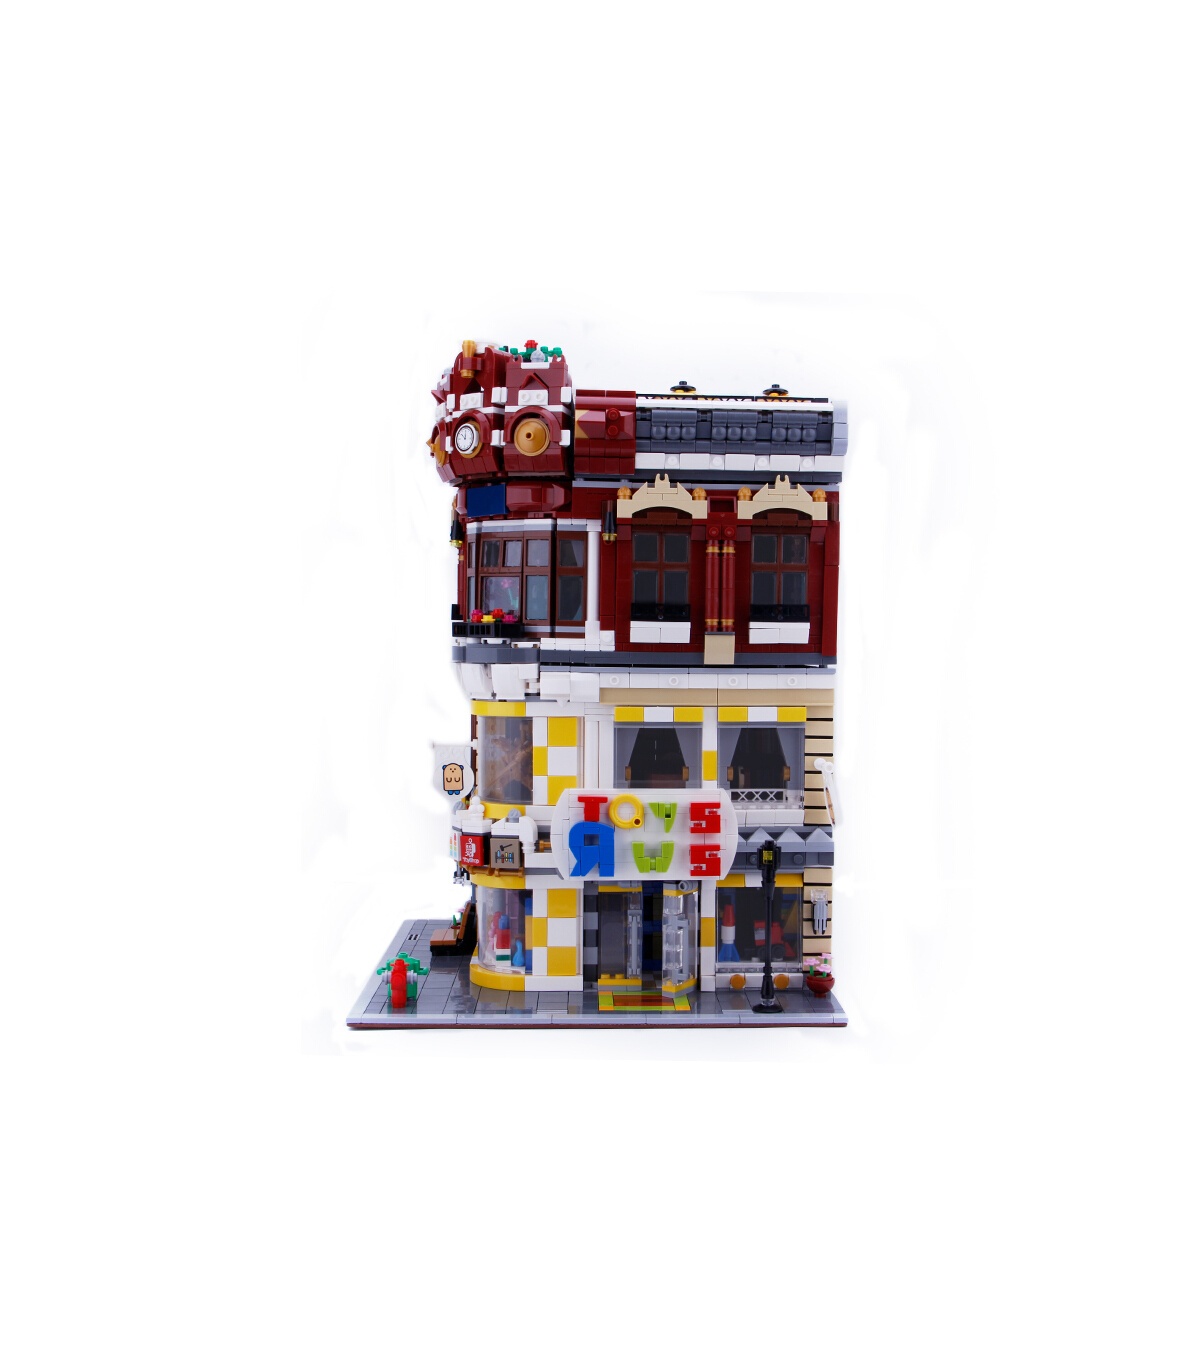 XINGBAO 01006 Toys And Bookstores Building Bricks Toy Set